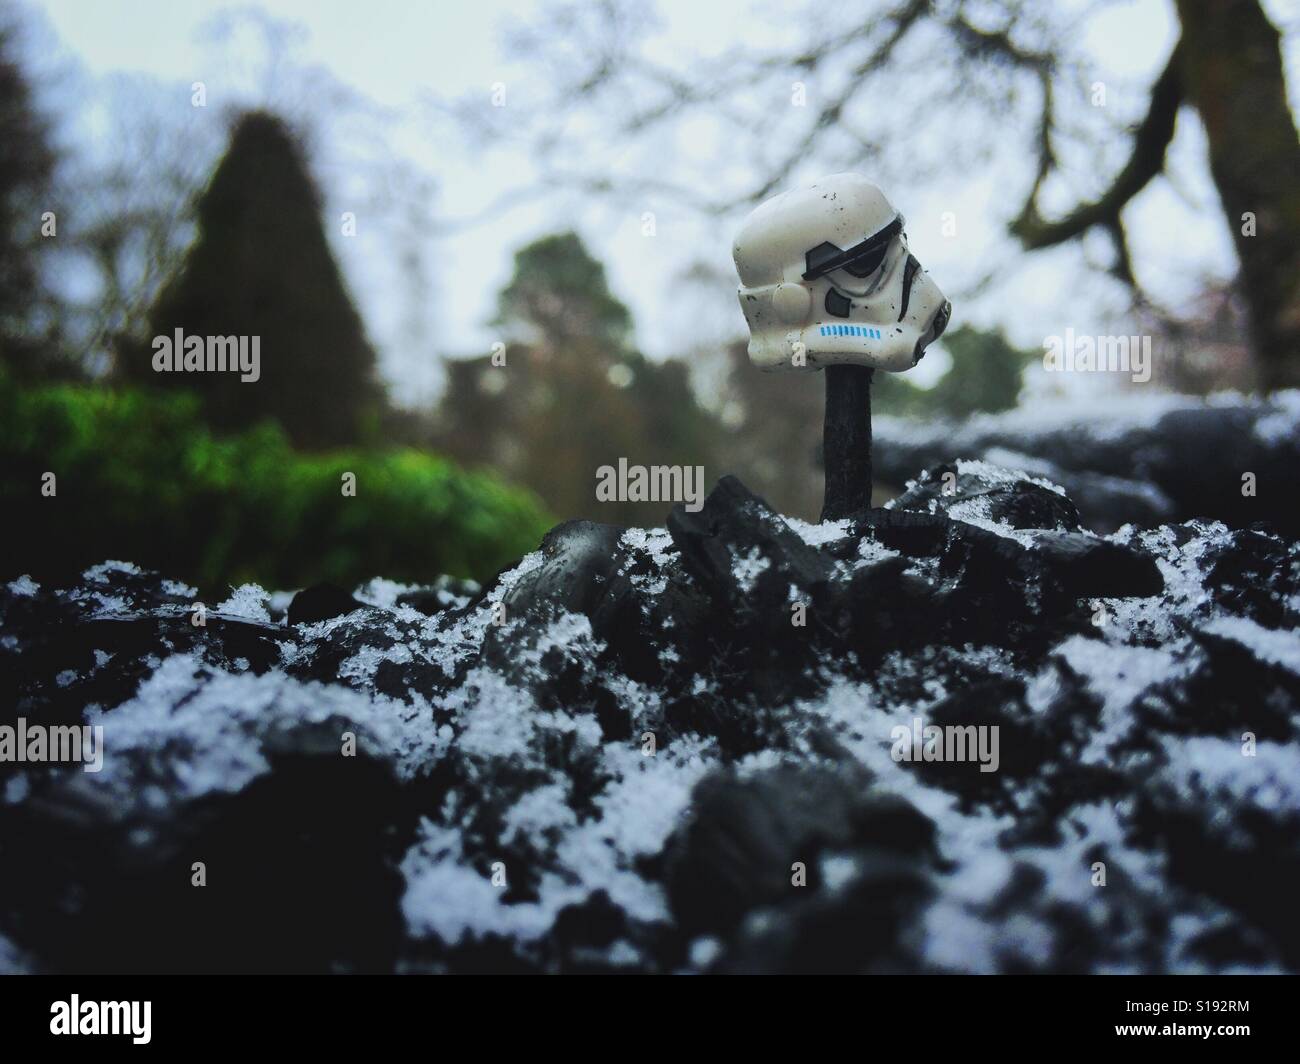 Lego Star Wars storm trooper helmet on stick, in snowy landscape. A warning to The Galactic Empire. Stock Photo